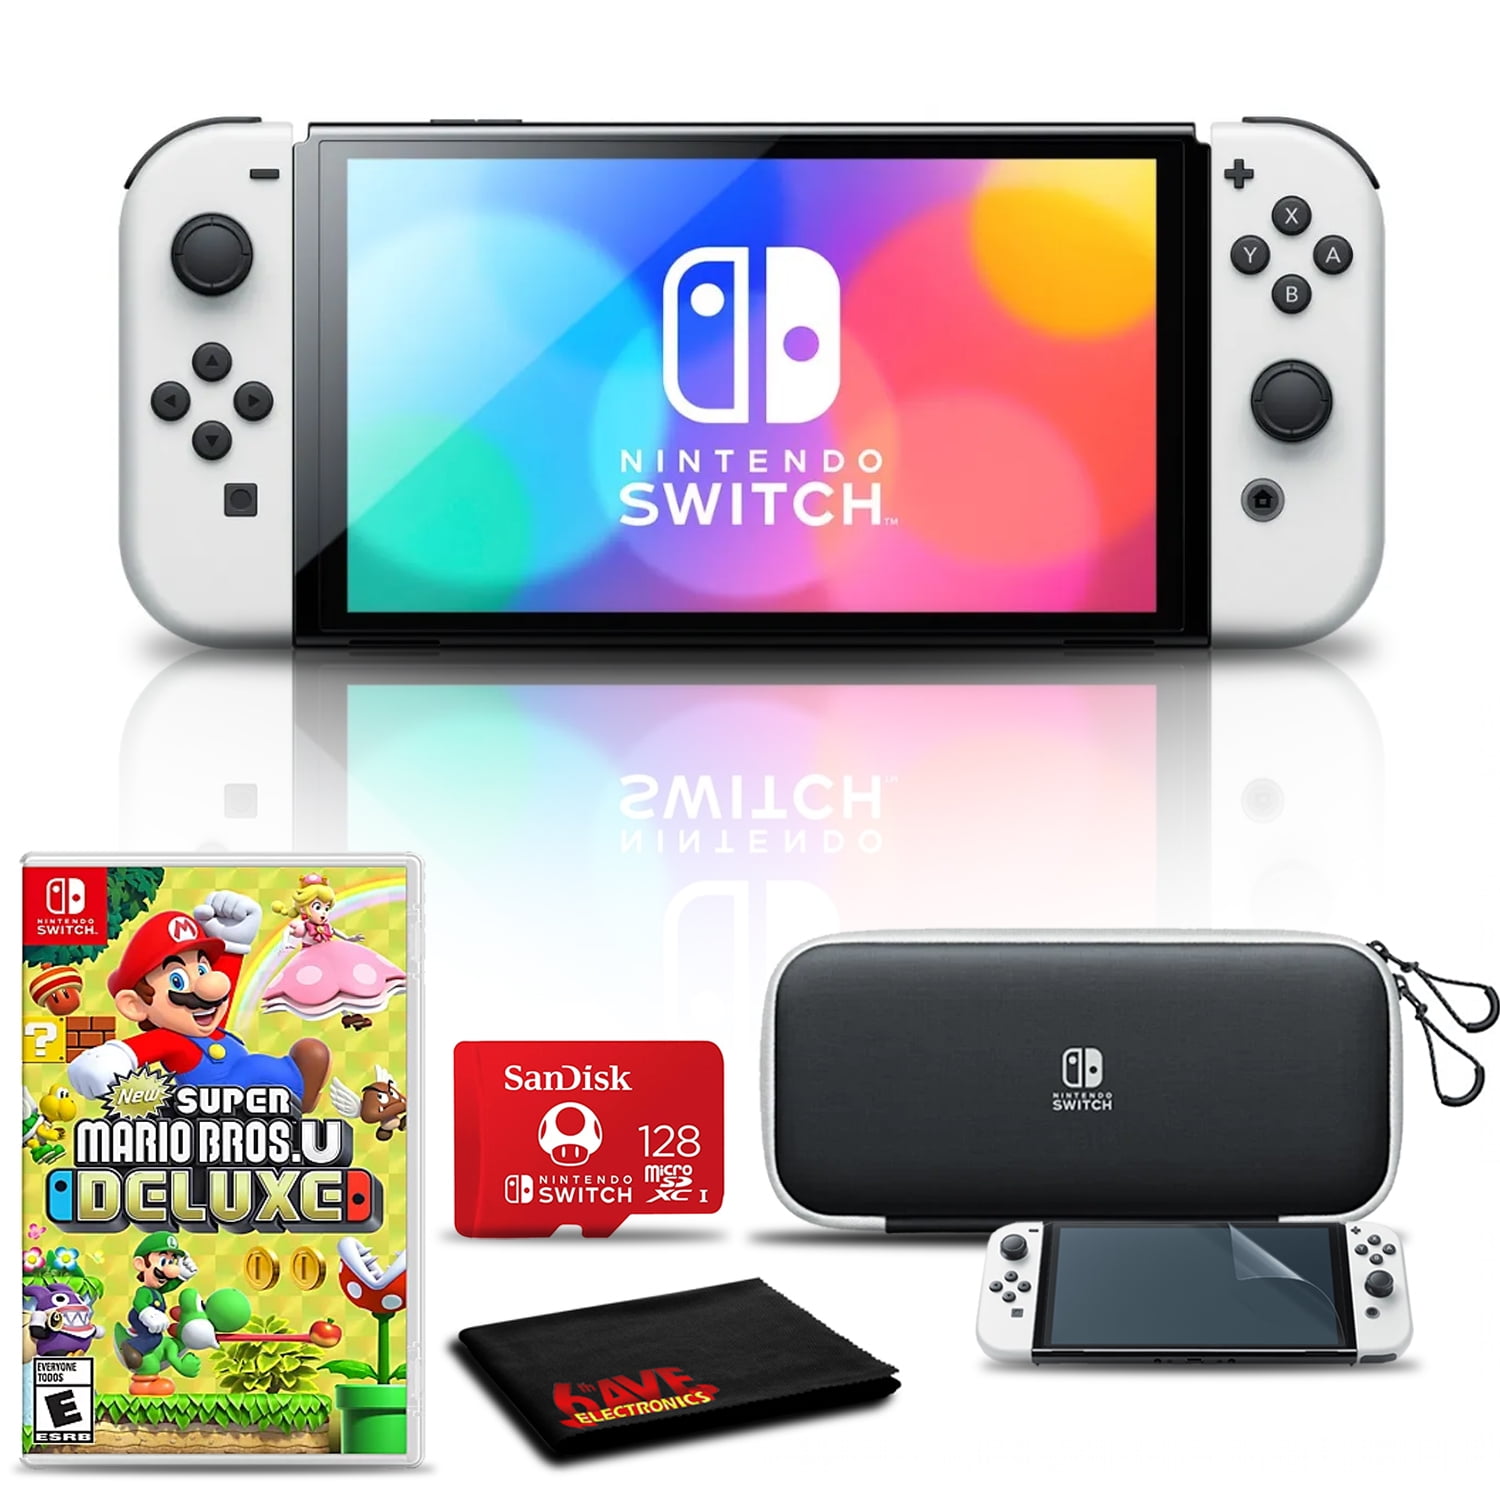 Nintendo Switch OLED White with Let's Go Pikachu, 128GB Card, and More